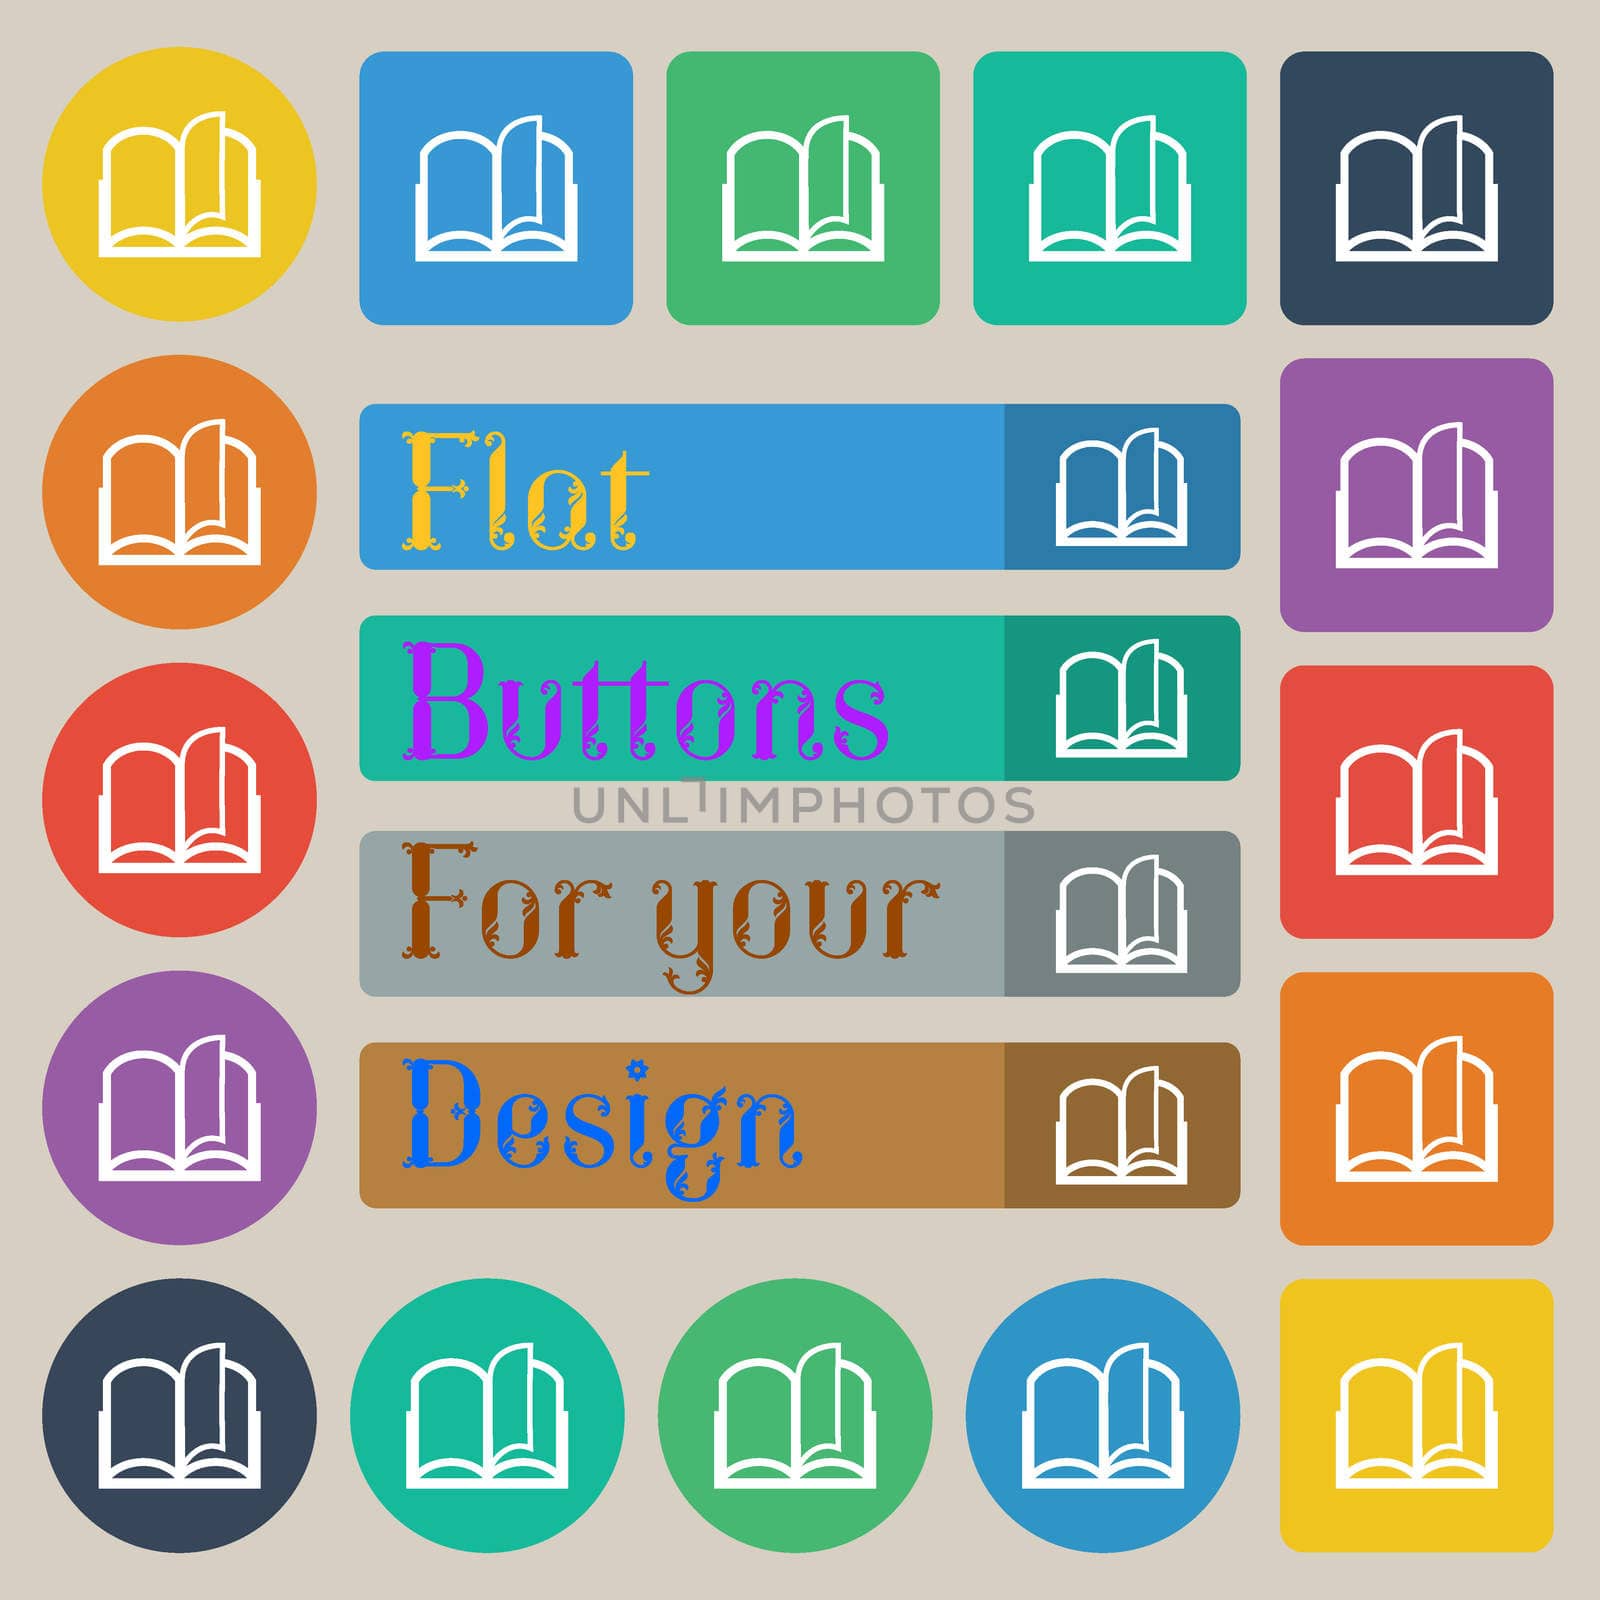 Book sign icon. Open book symbol. Set of twenty colored flat, round, square and rectangular buttons. illustration